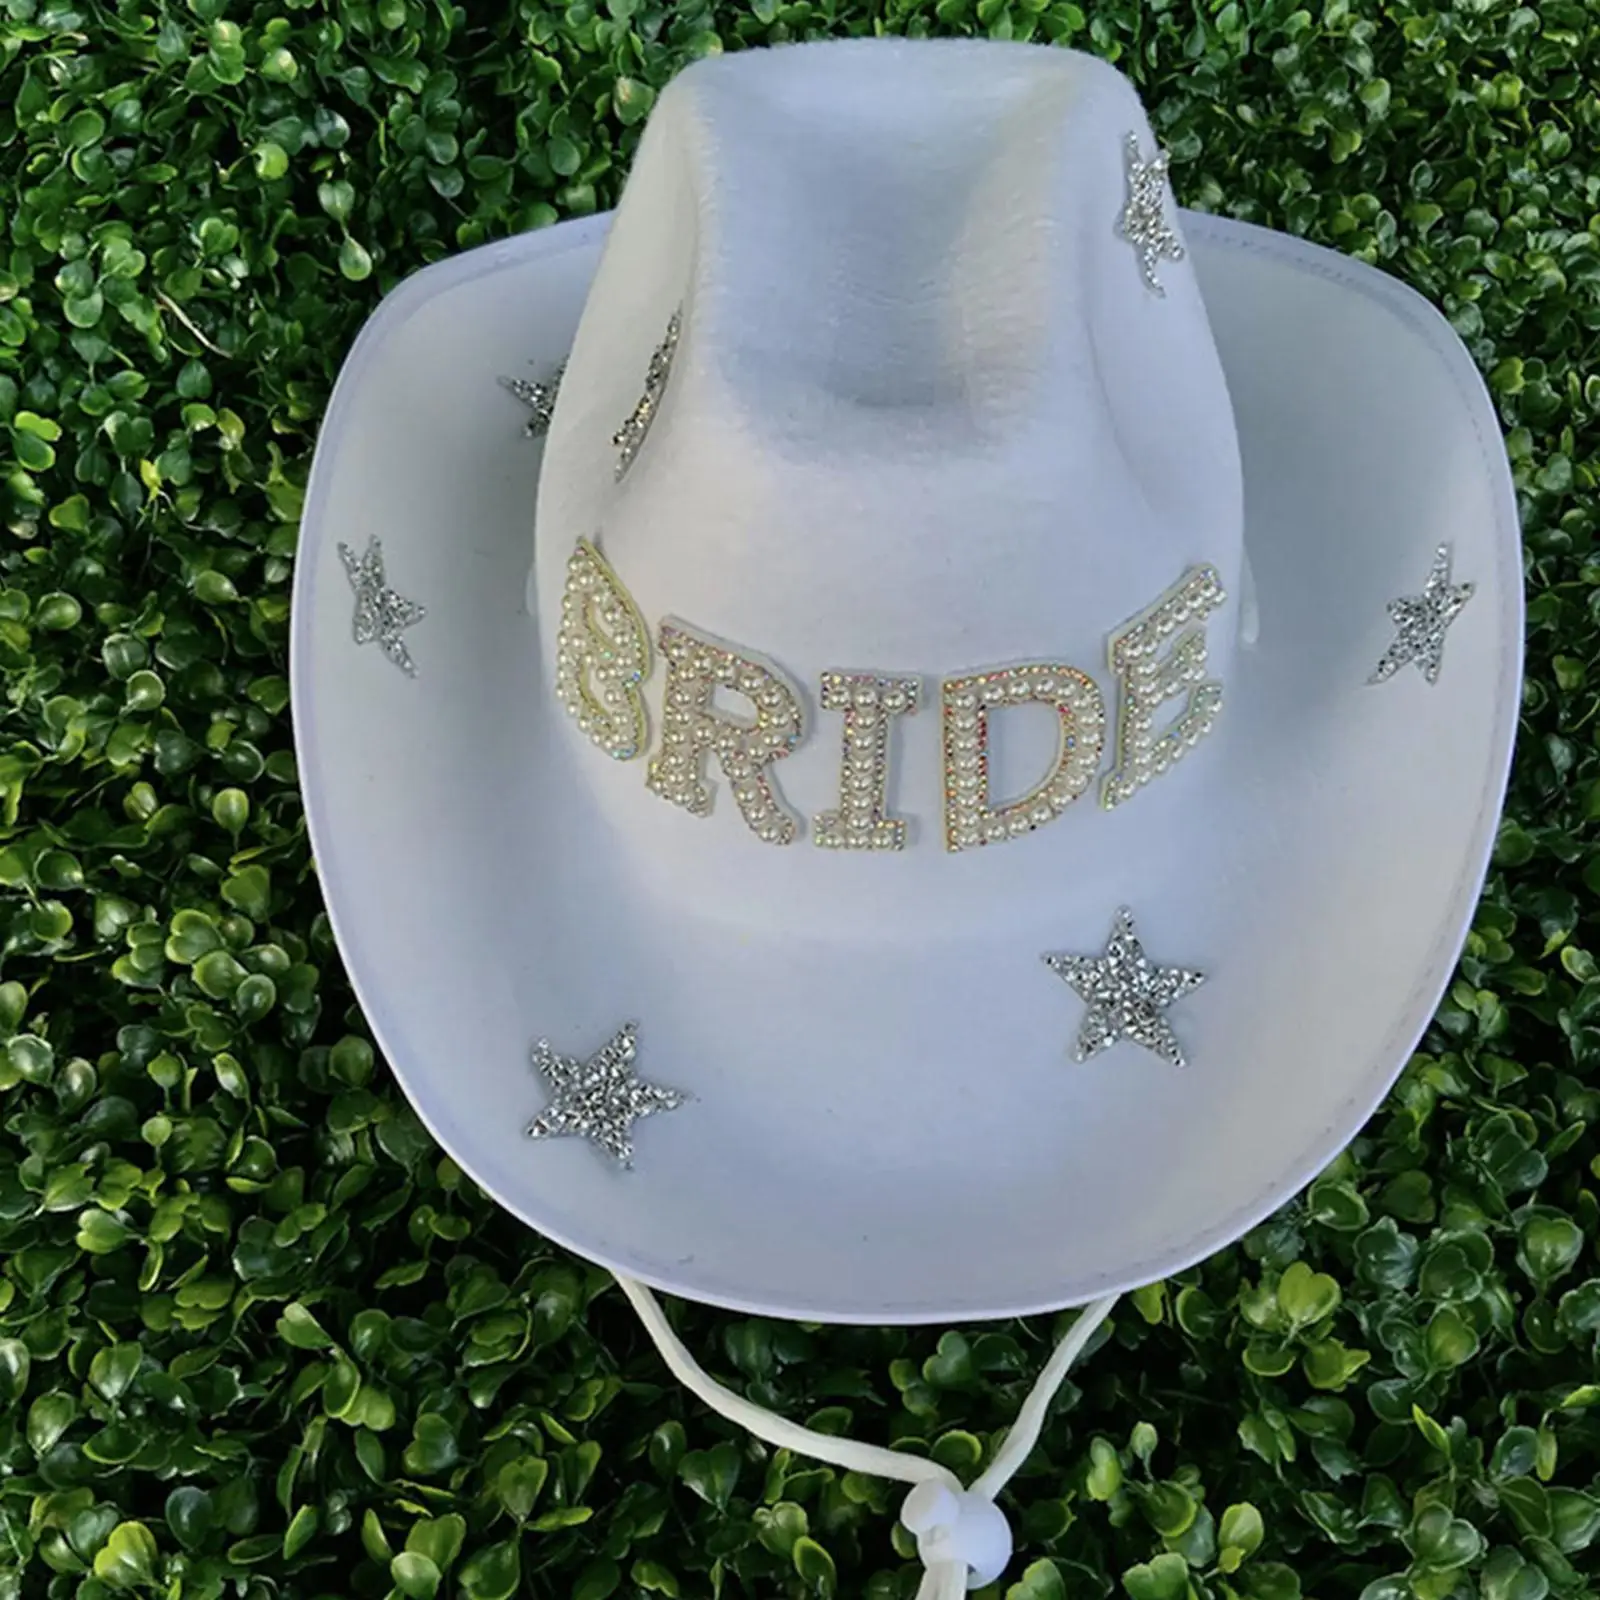 Felt Cloth White Blinking Rhinestone Bridal Cowgirl Hat Cowboy Hat, for Cosplay Party Costumes Accessories Lightweight Portable